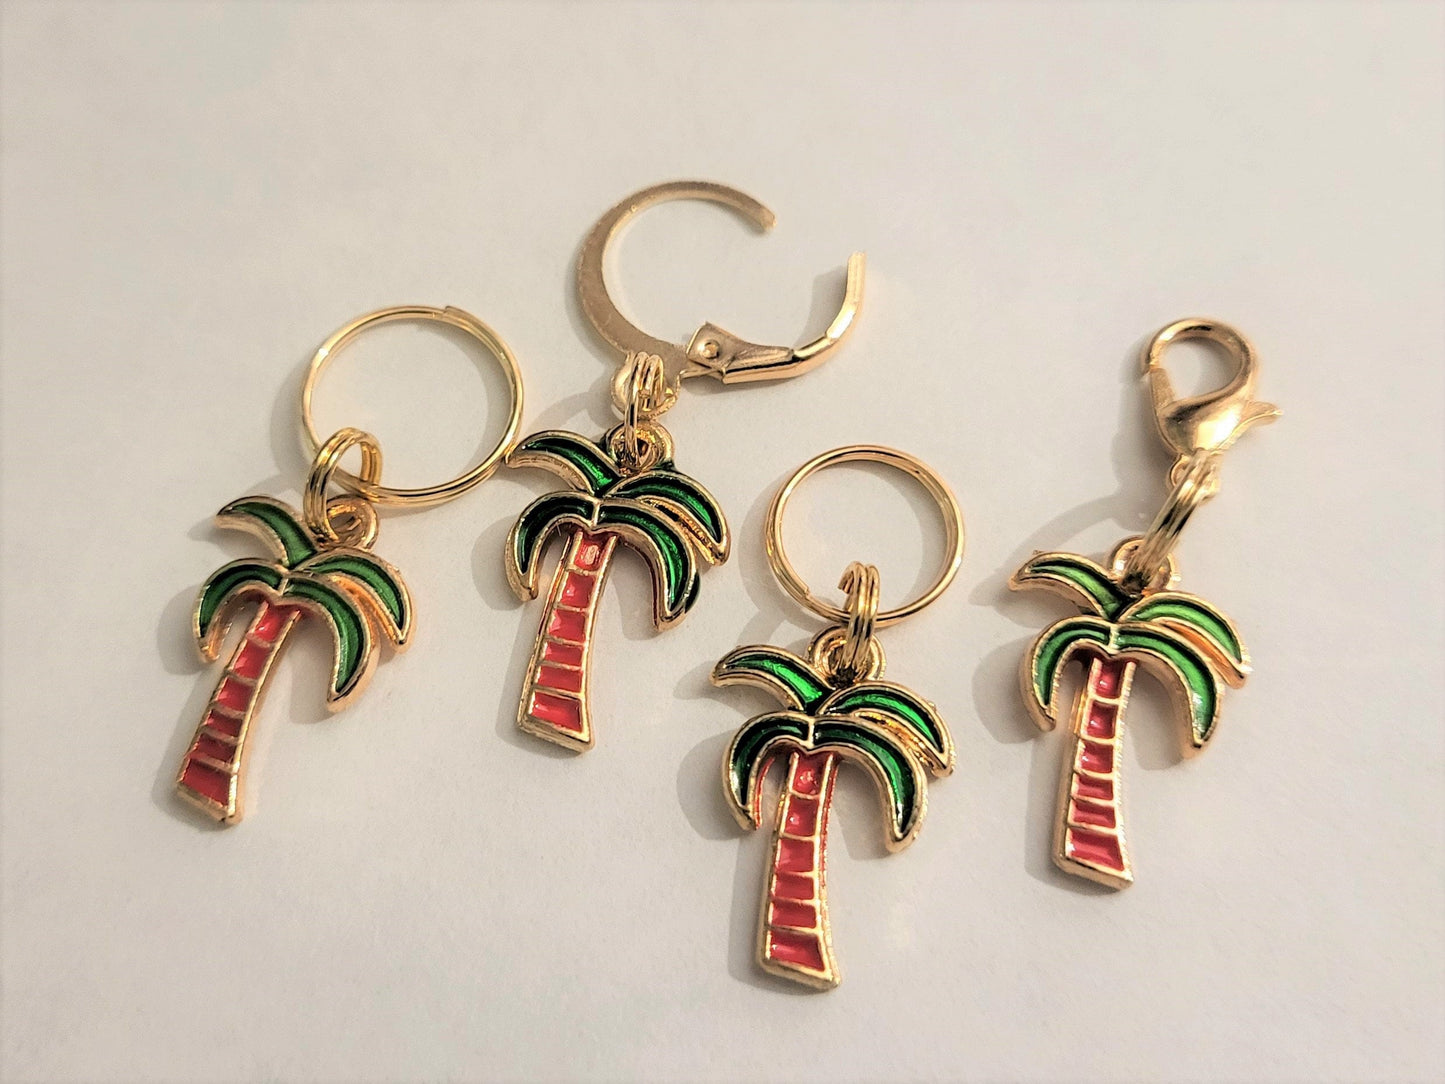 Stitch Markers for Knitting, Coconut Palm Trees, 4pc | Crochet stitch marker, progress keeper, project bag charms, crochet accessories